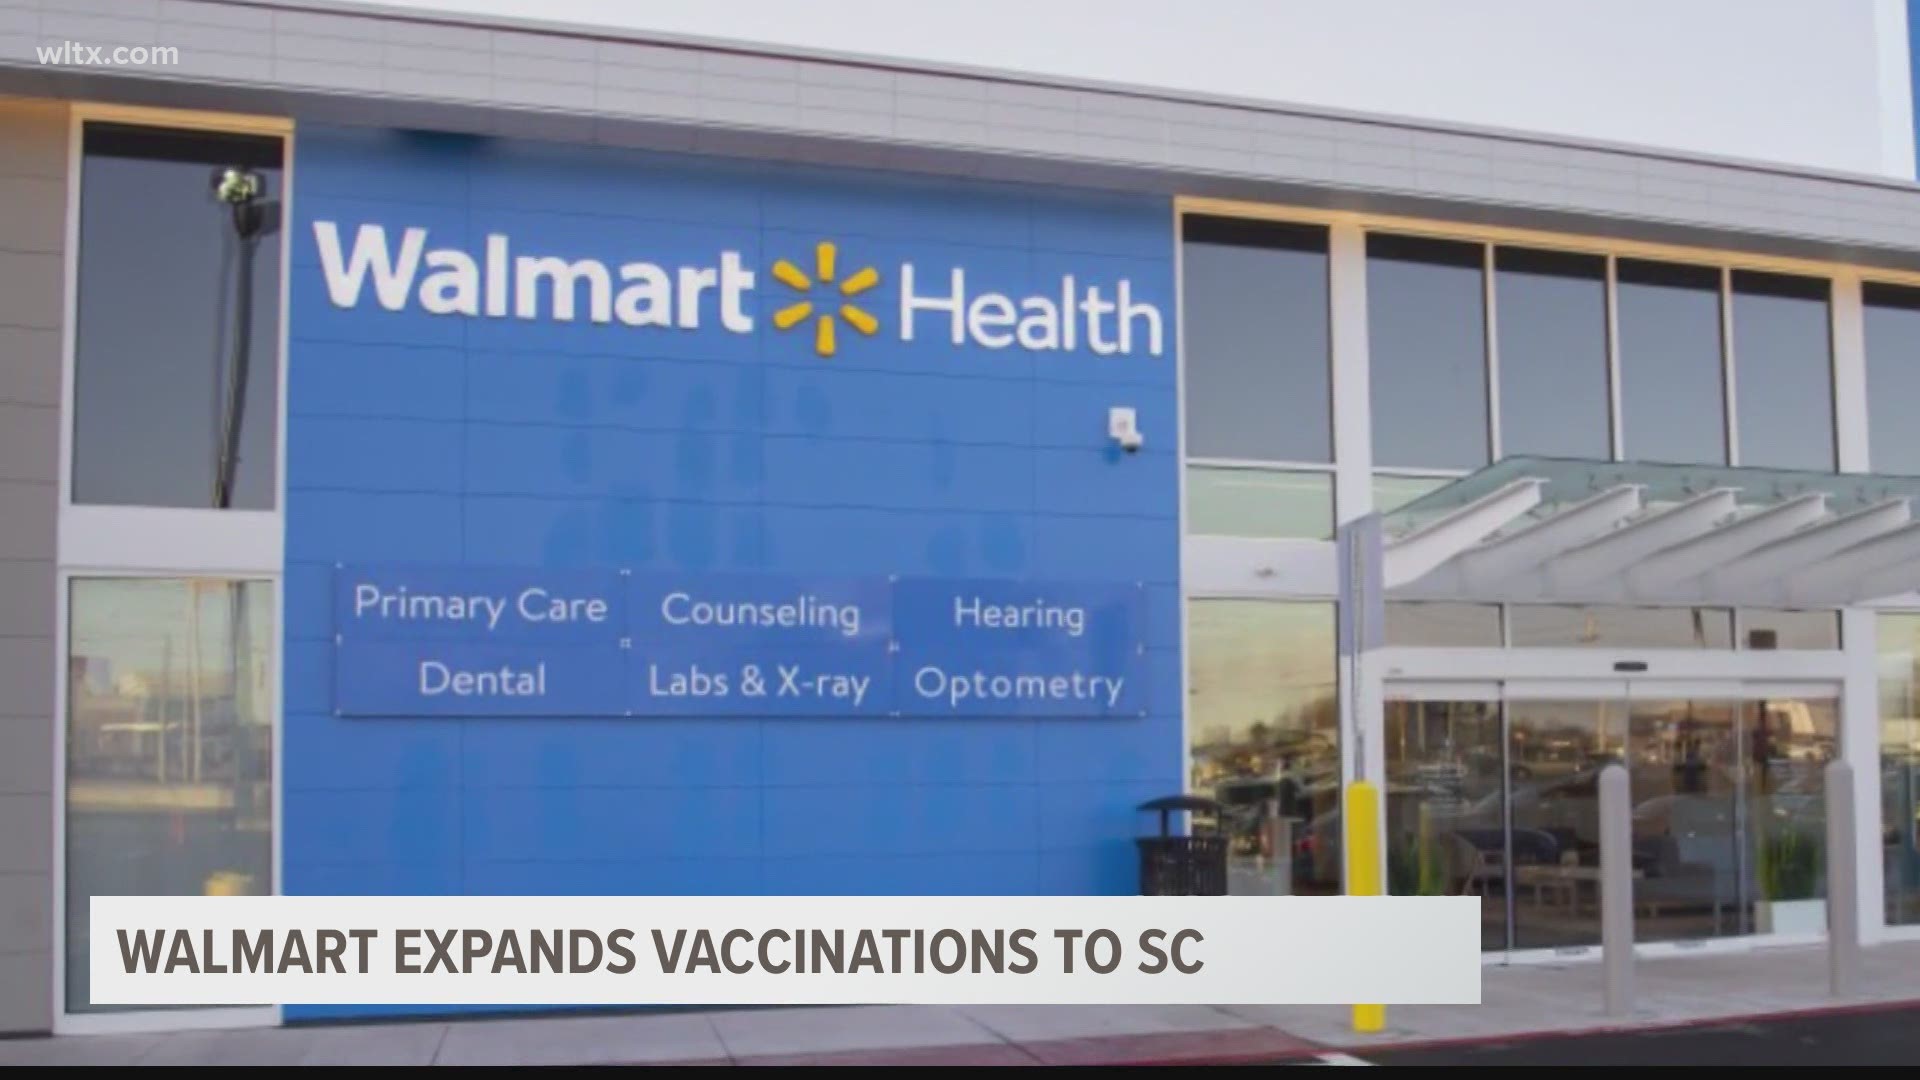 which covid vaccine is walmart giving pfizer or moderna